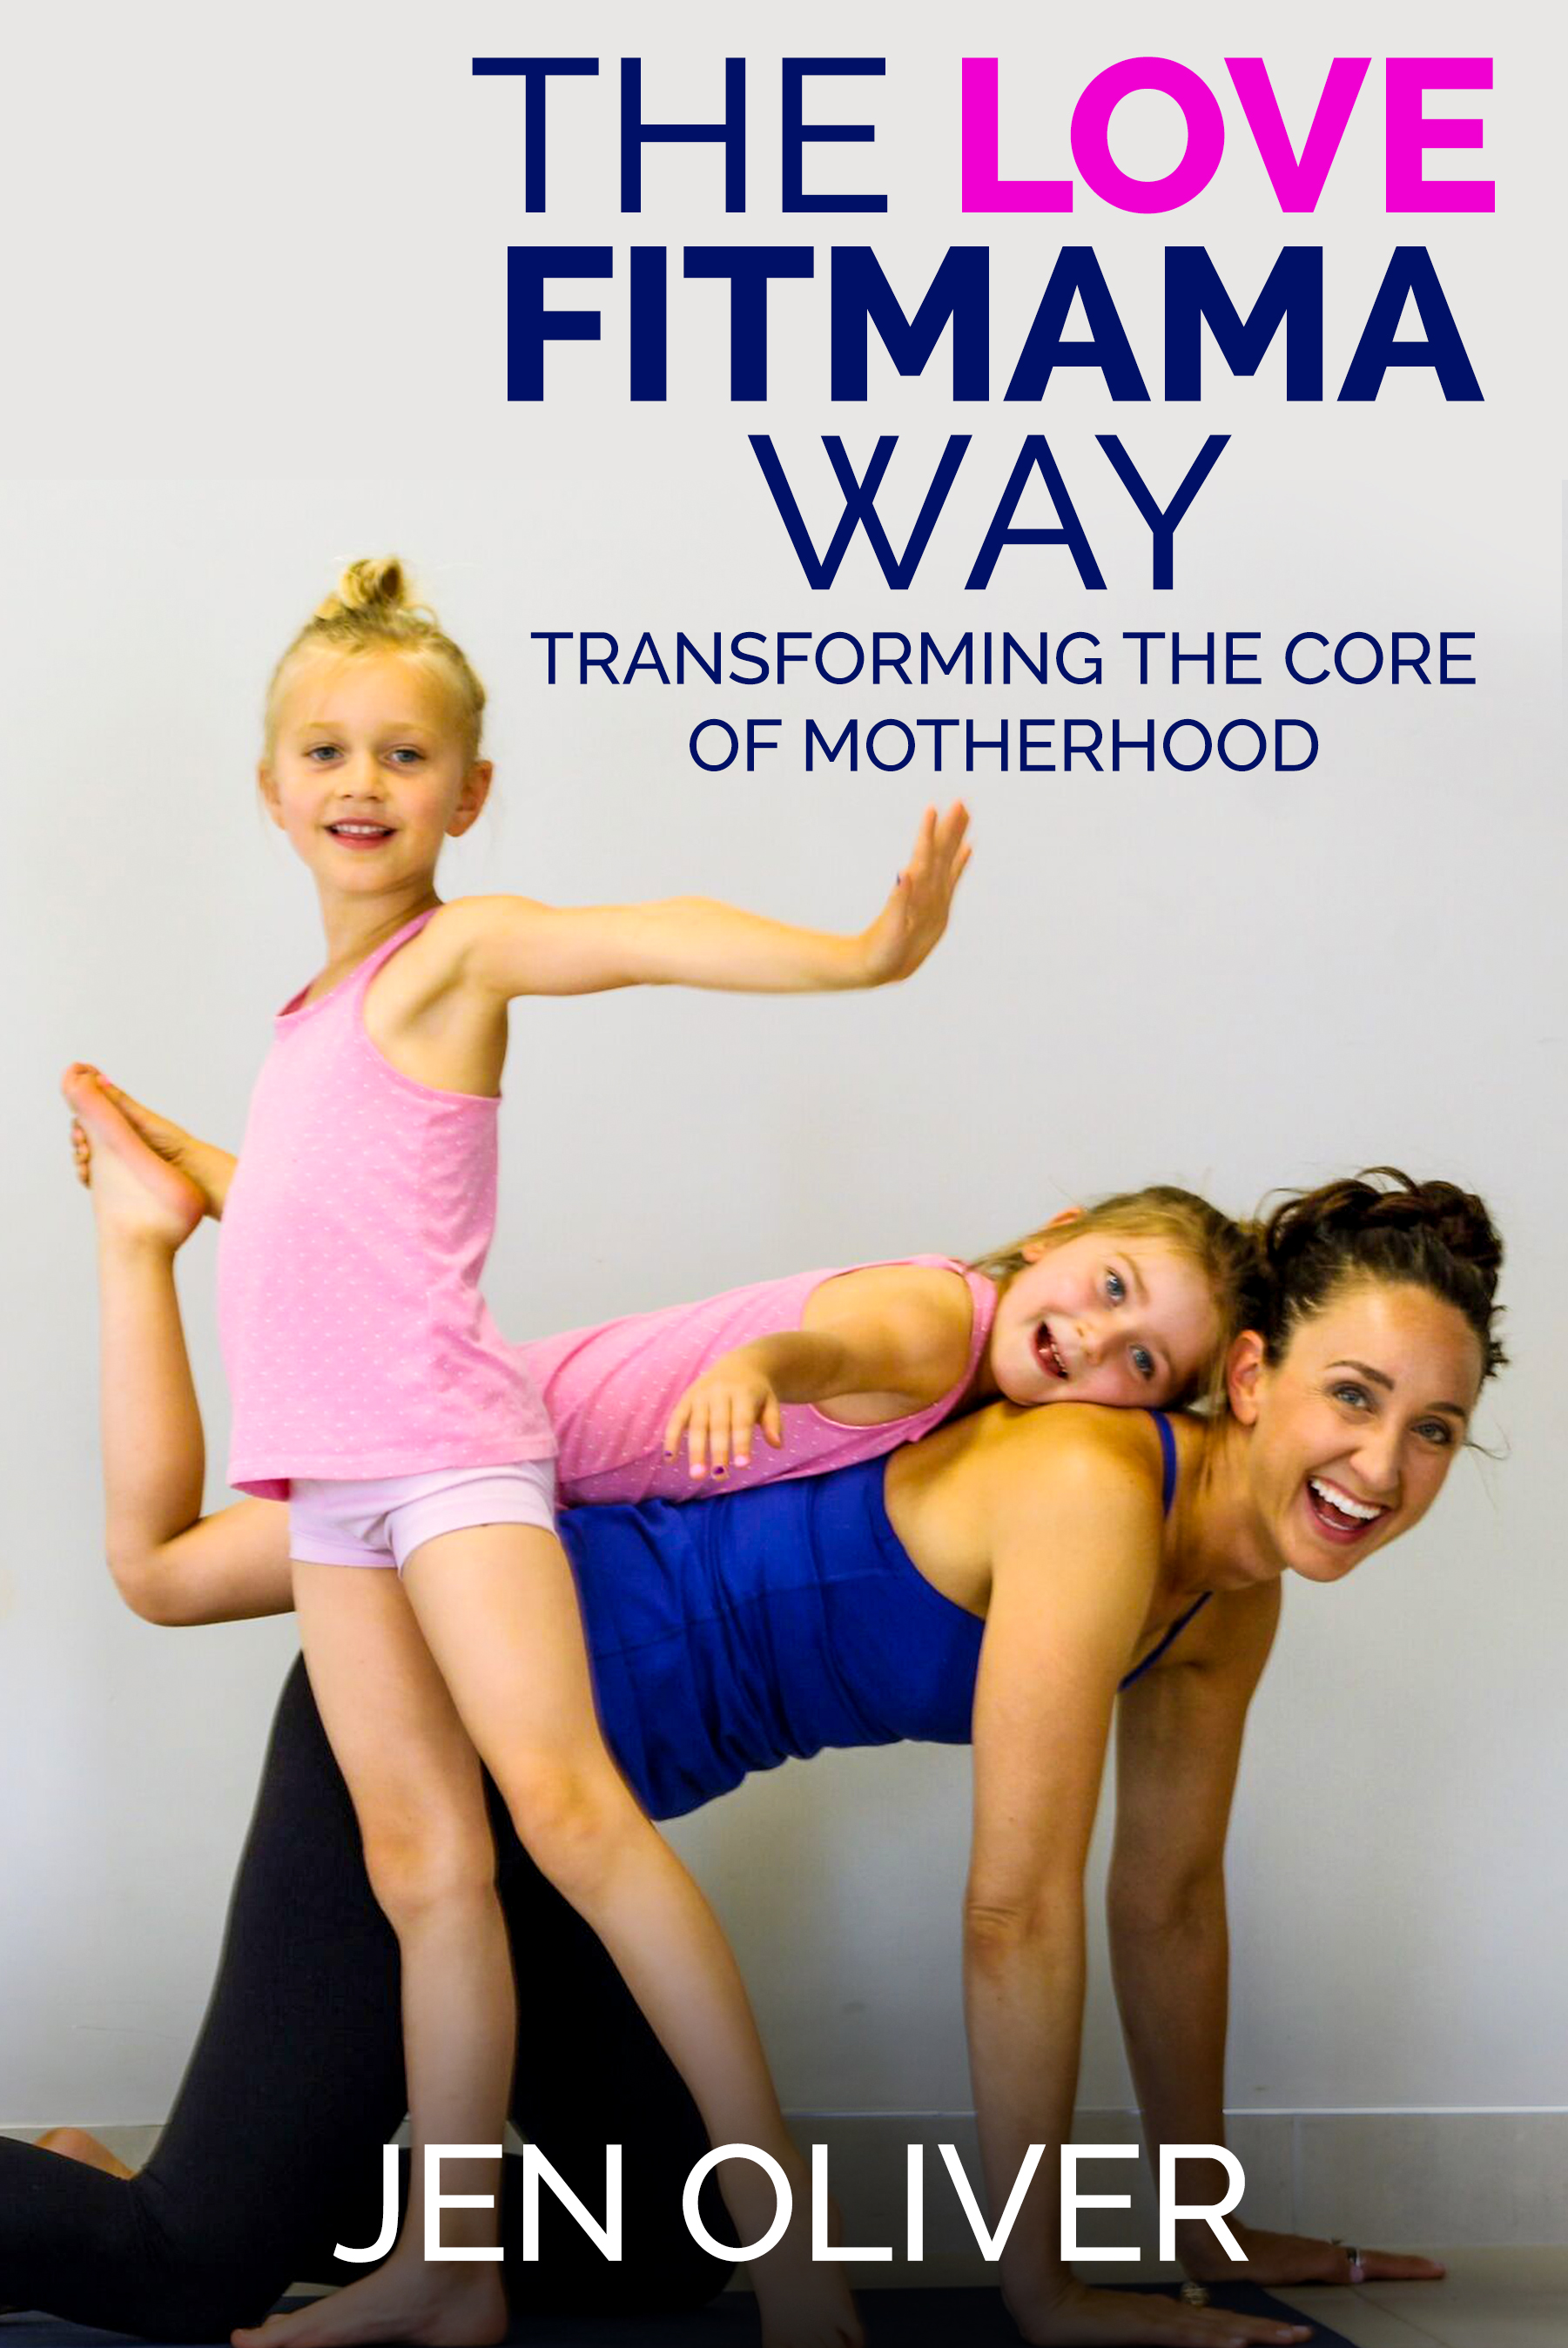 FREE: The Love FitMama Way by Jennifer Oliver